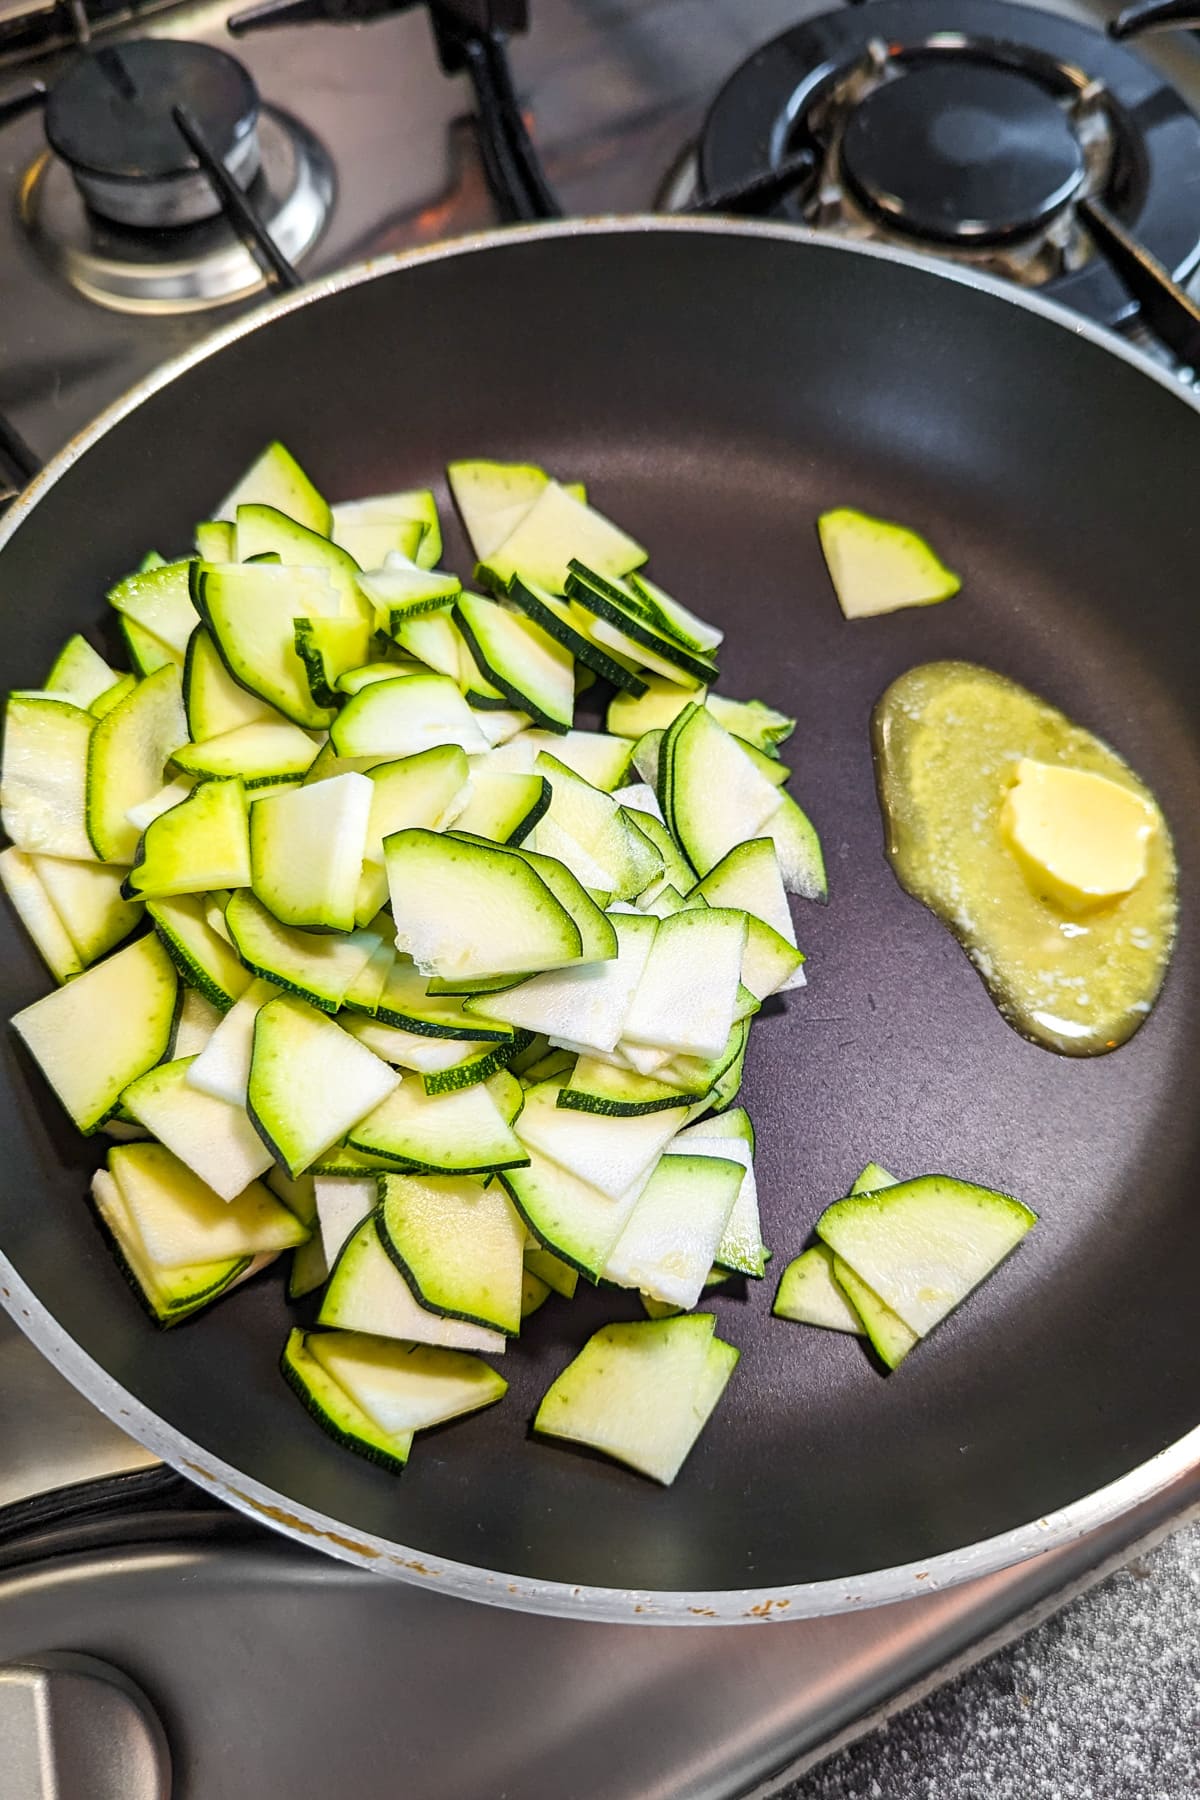 Frying pan with butter and zucchini slices in it.